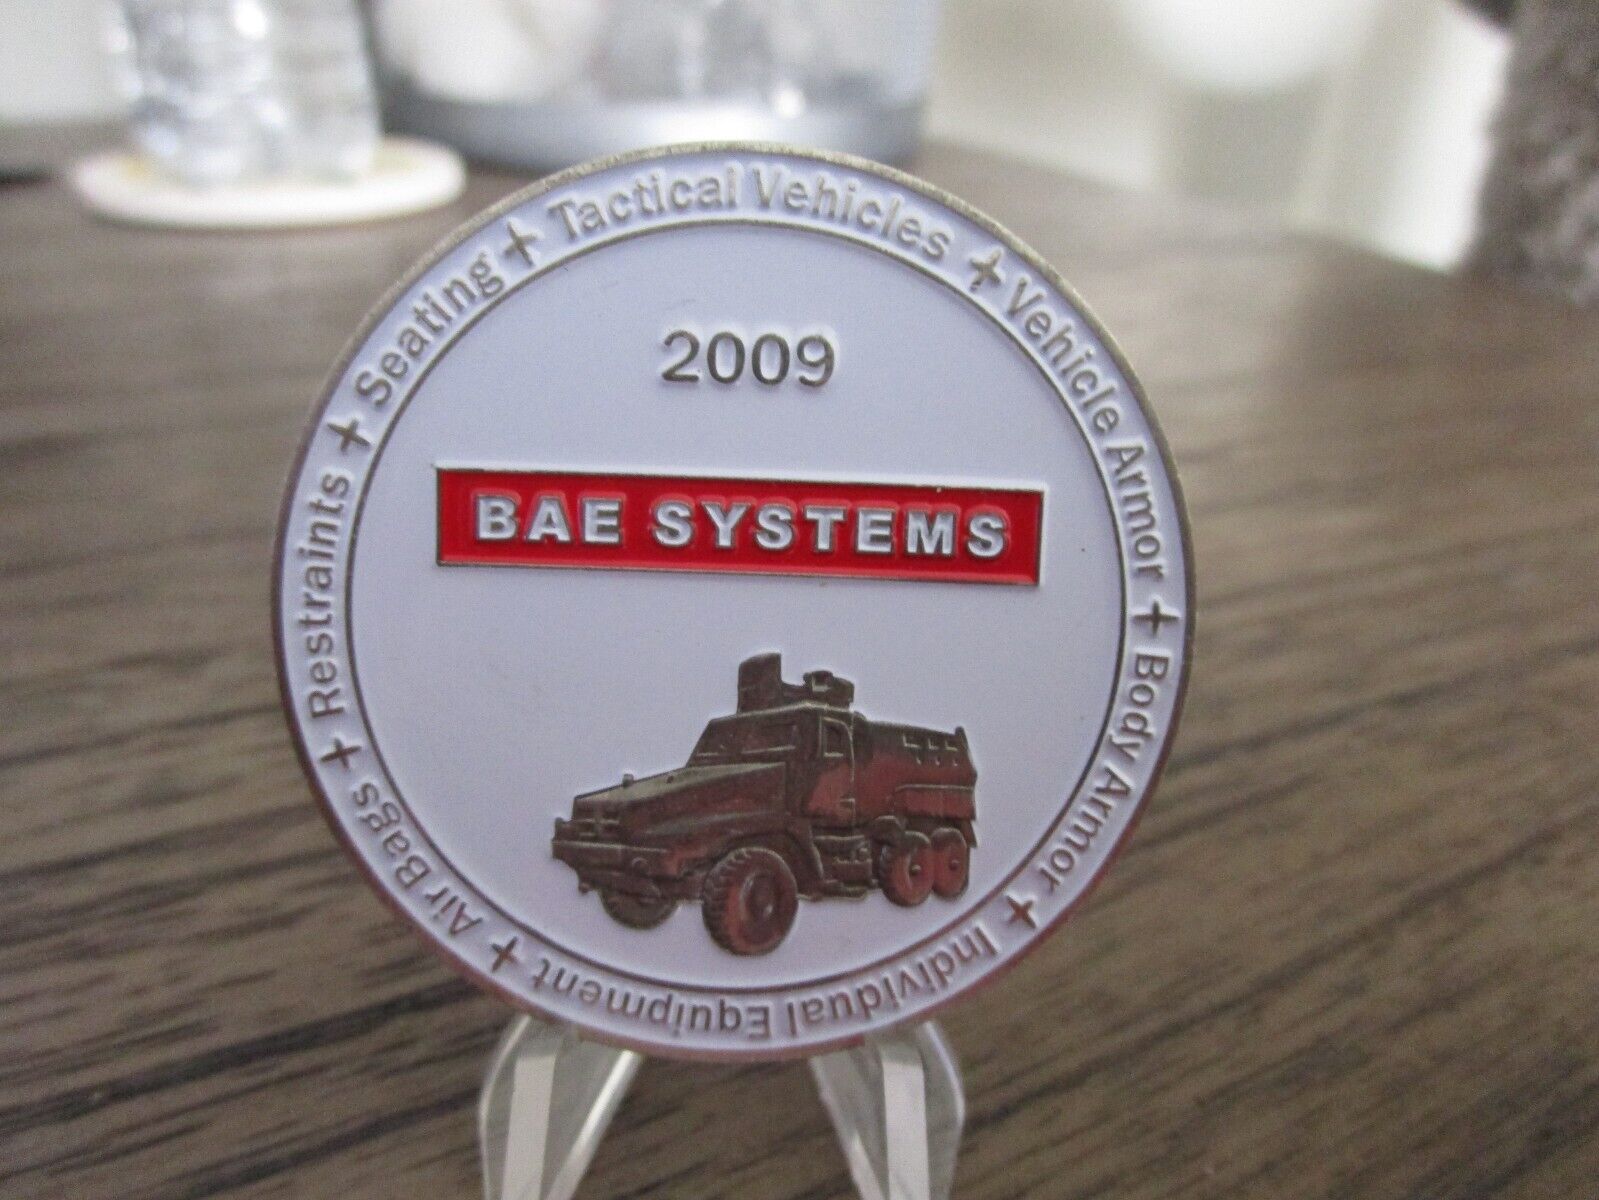 British Aerospace BAE Systems 2009 Tactical Vehicles Challenge Coin #480U